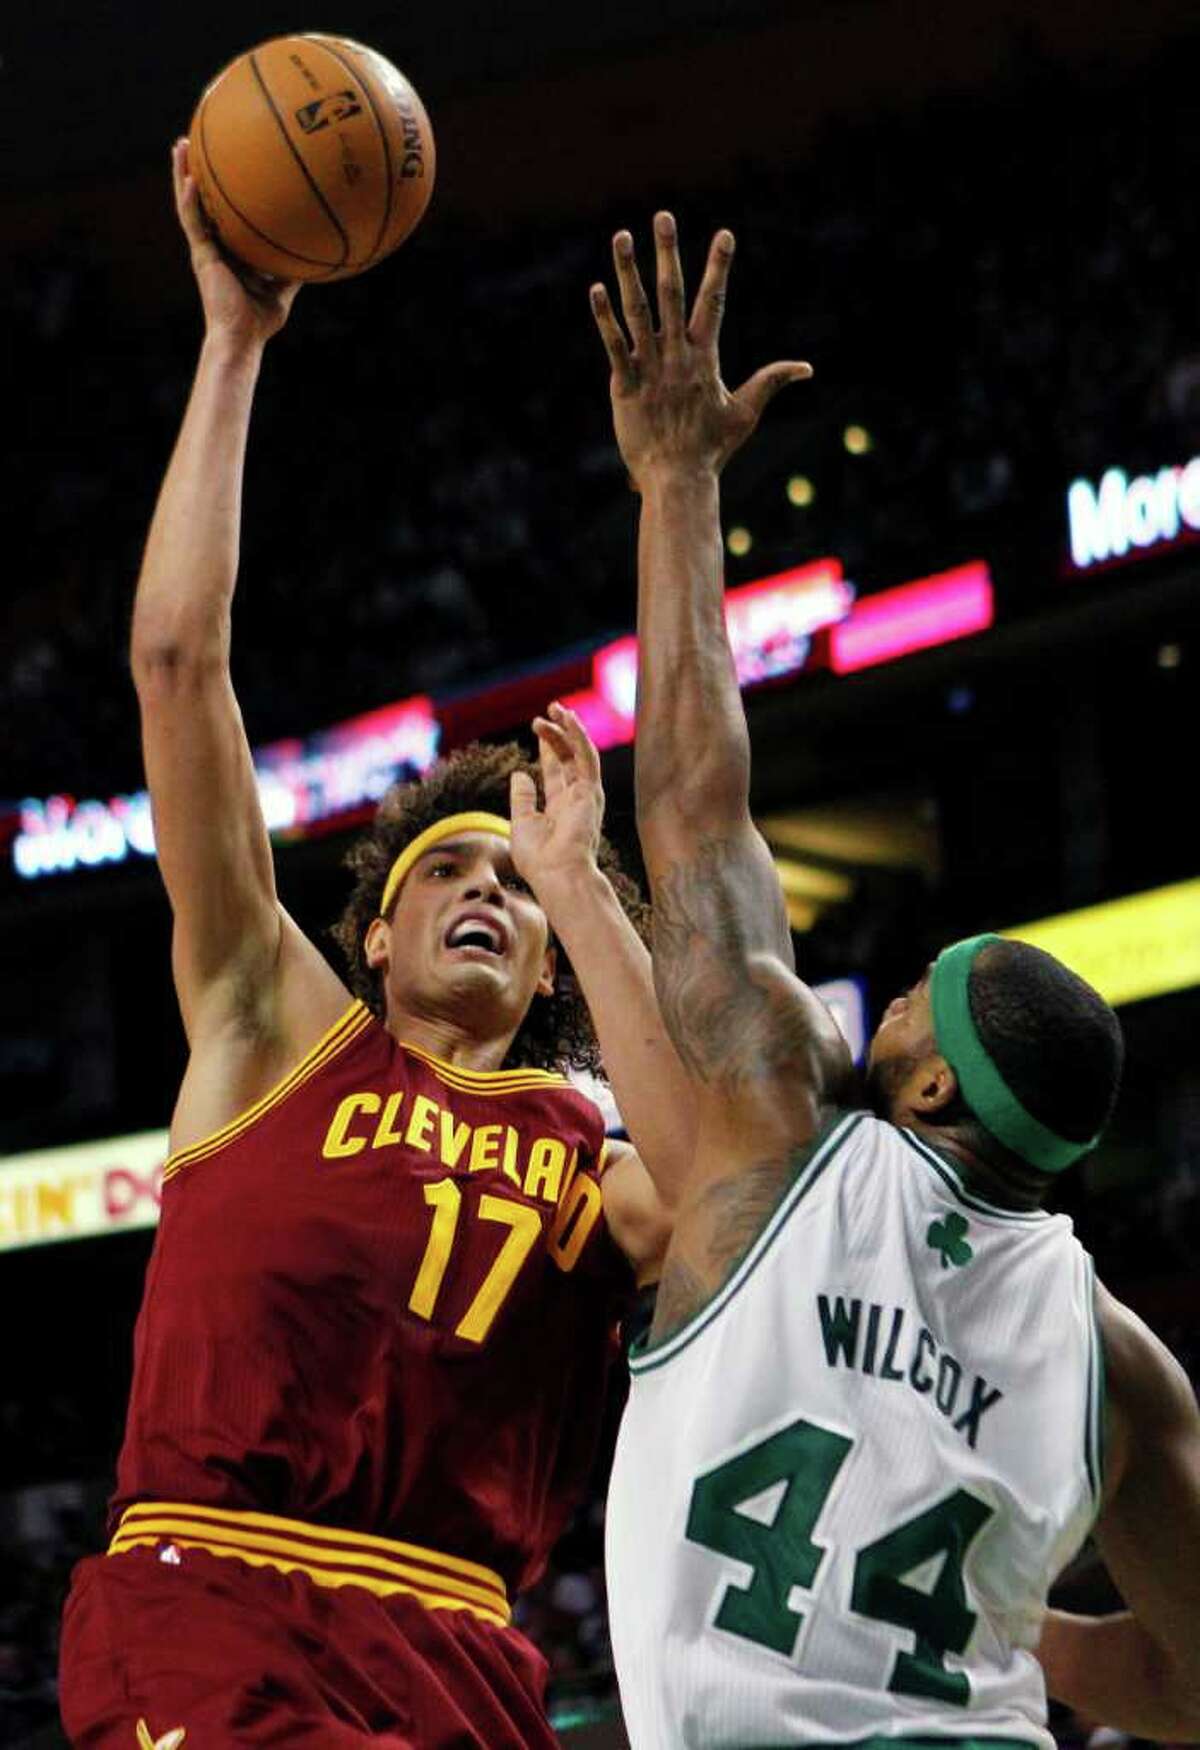 Celtics take control in third quarter for first win over Cavs